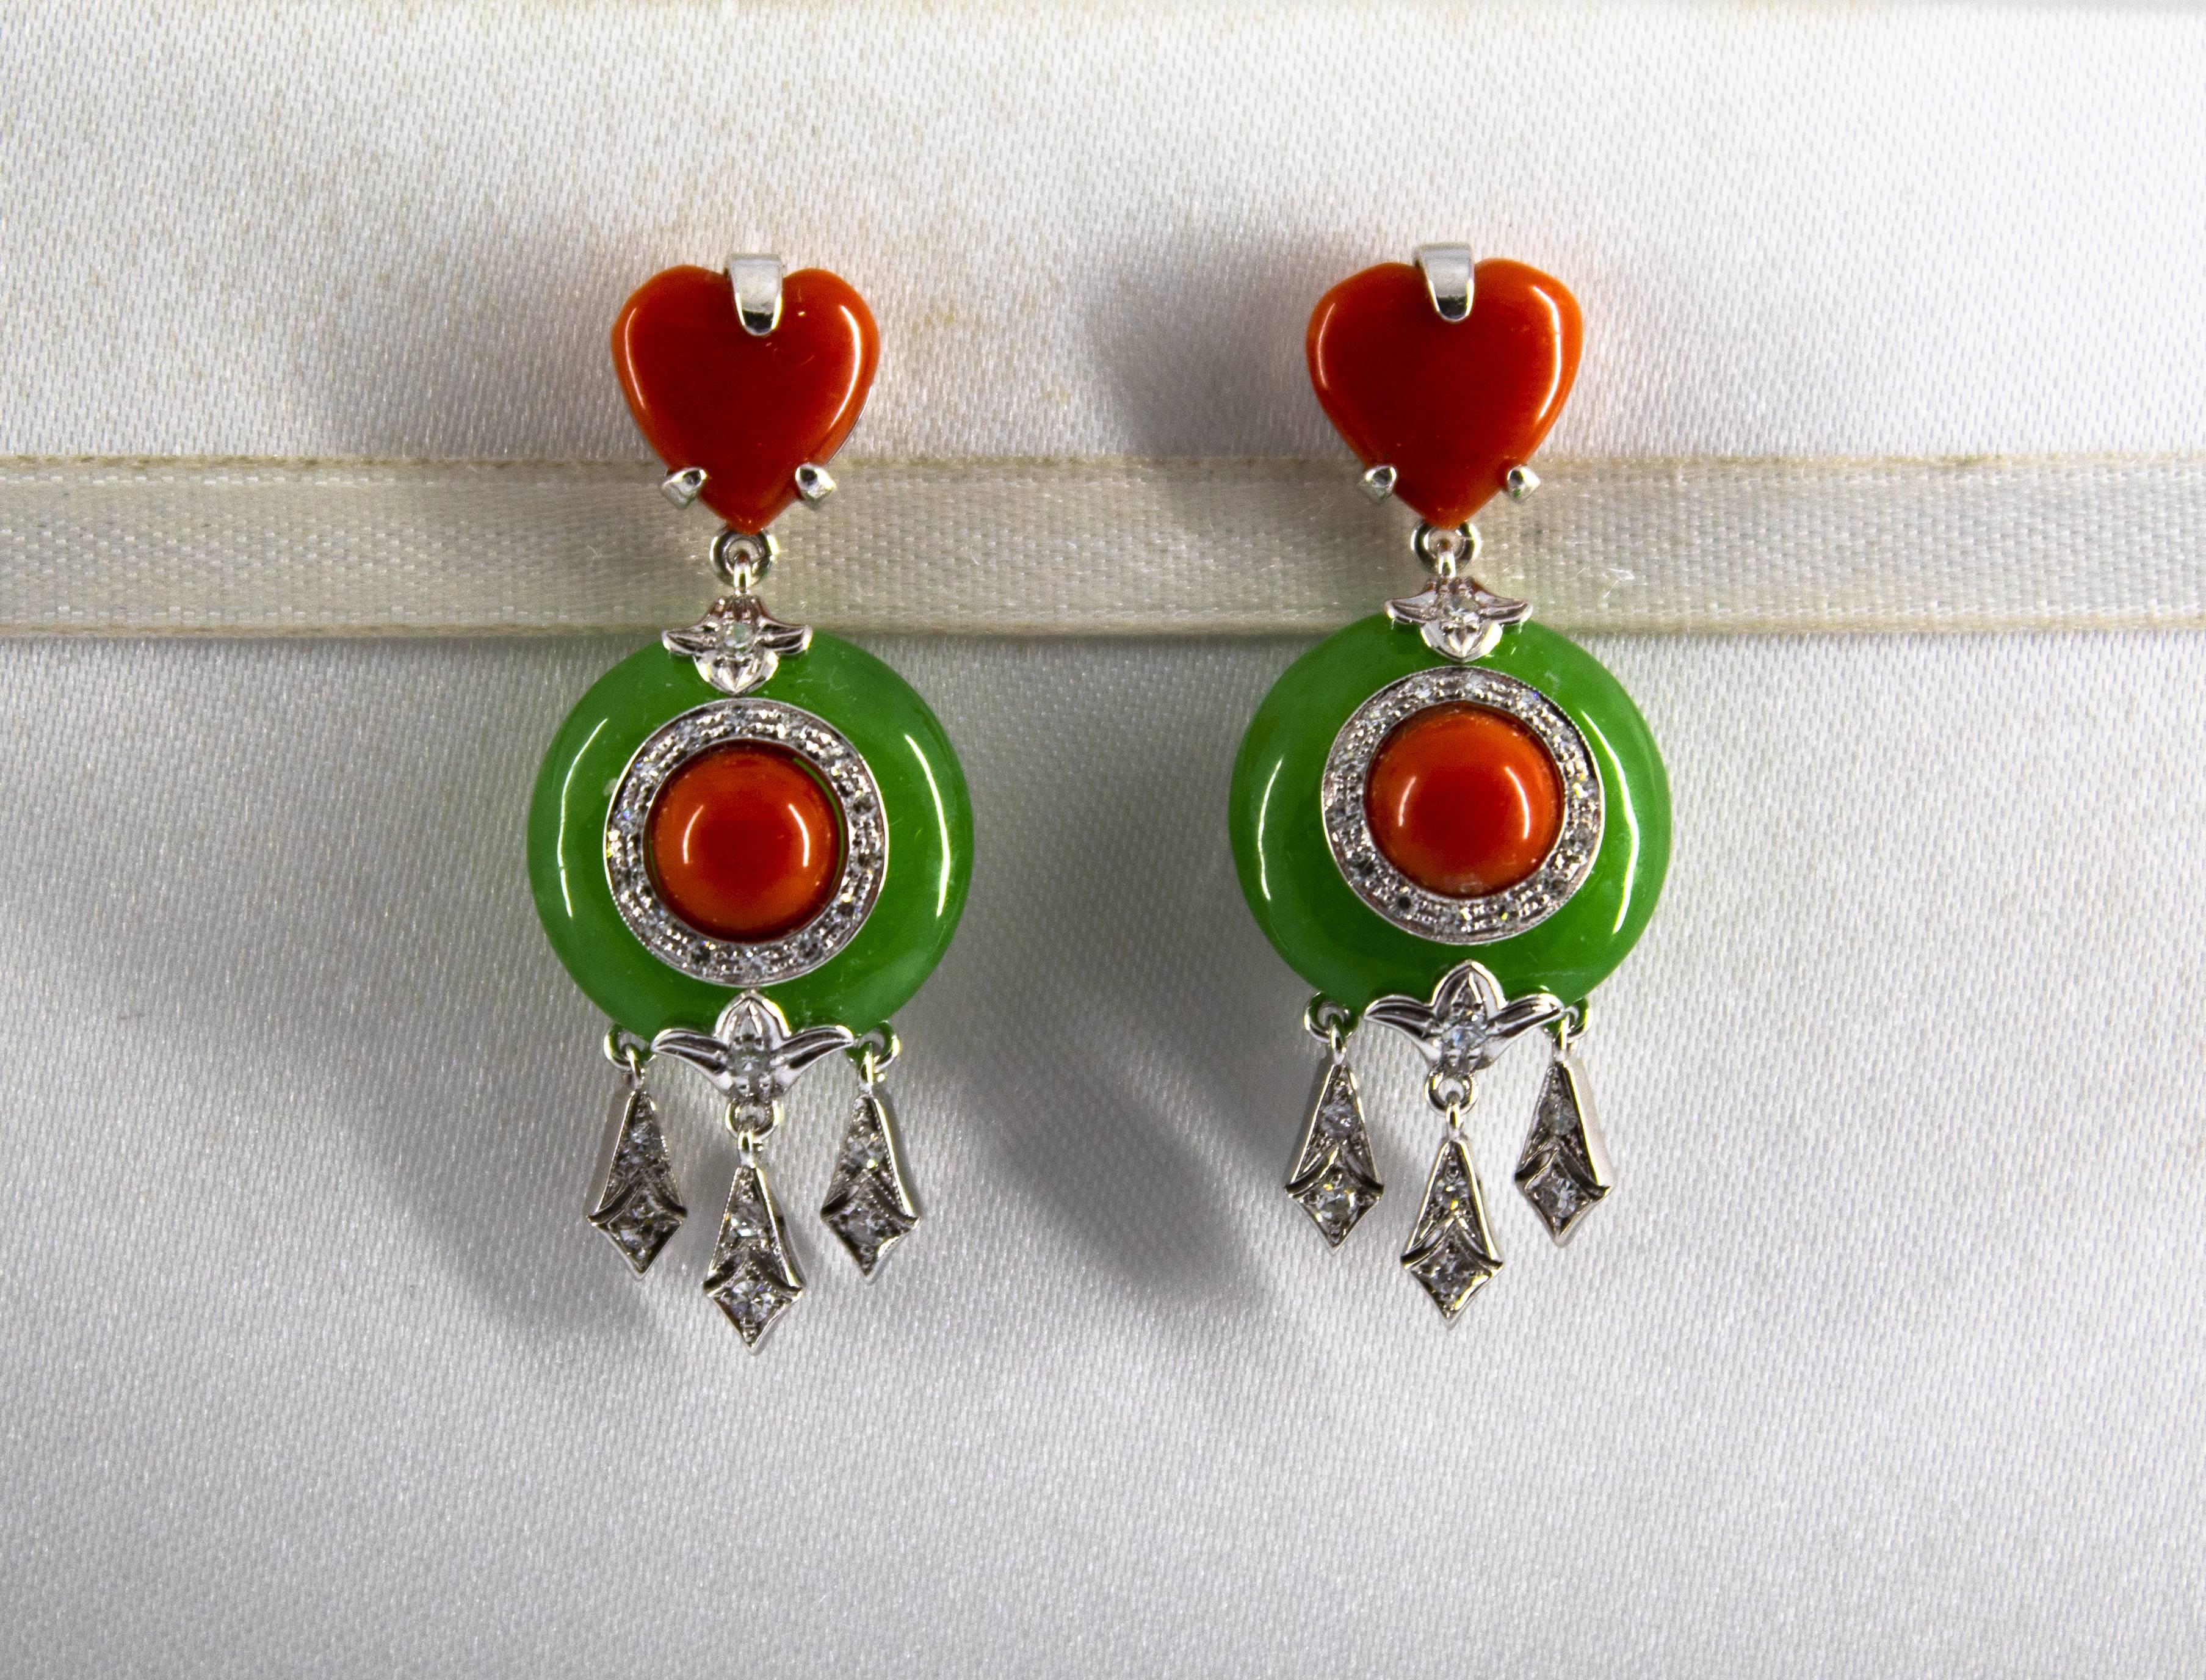 These Stud Earrings are made of 14K White Gold.
These Earrings have 0.30 Carats of White Diamonds.
These Earrings have also Mediterranean (Sardinia, Italy) Red Coral and Jadeite.
All our Earrings have pins for pierced ears but we can change the